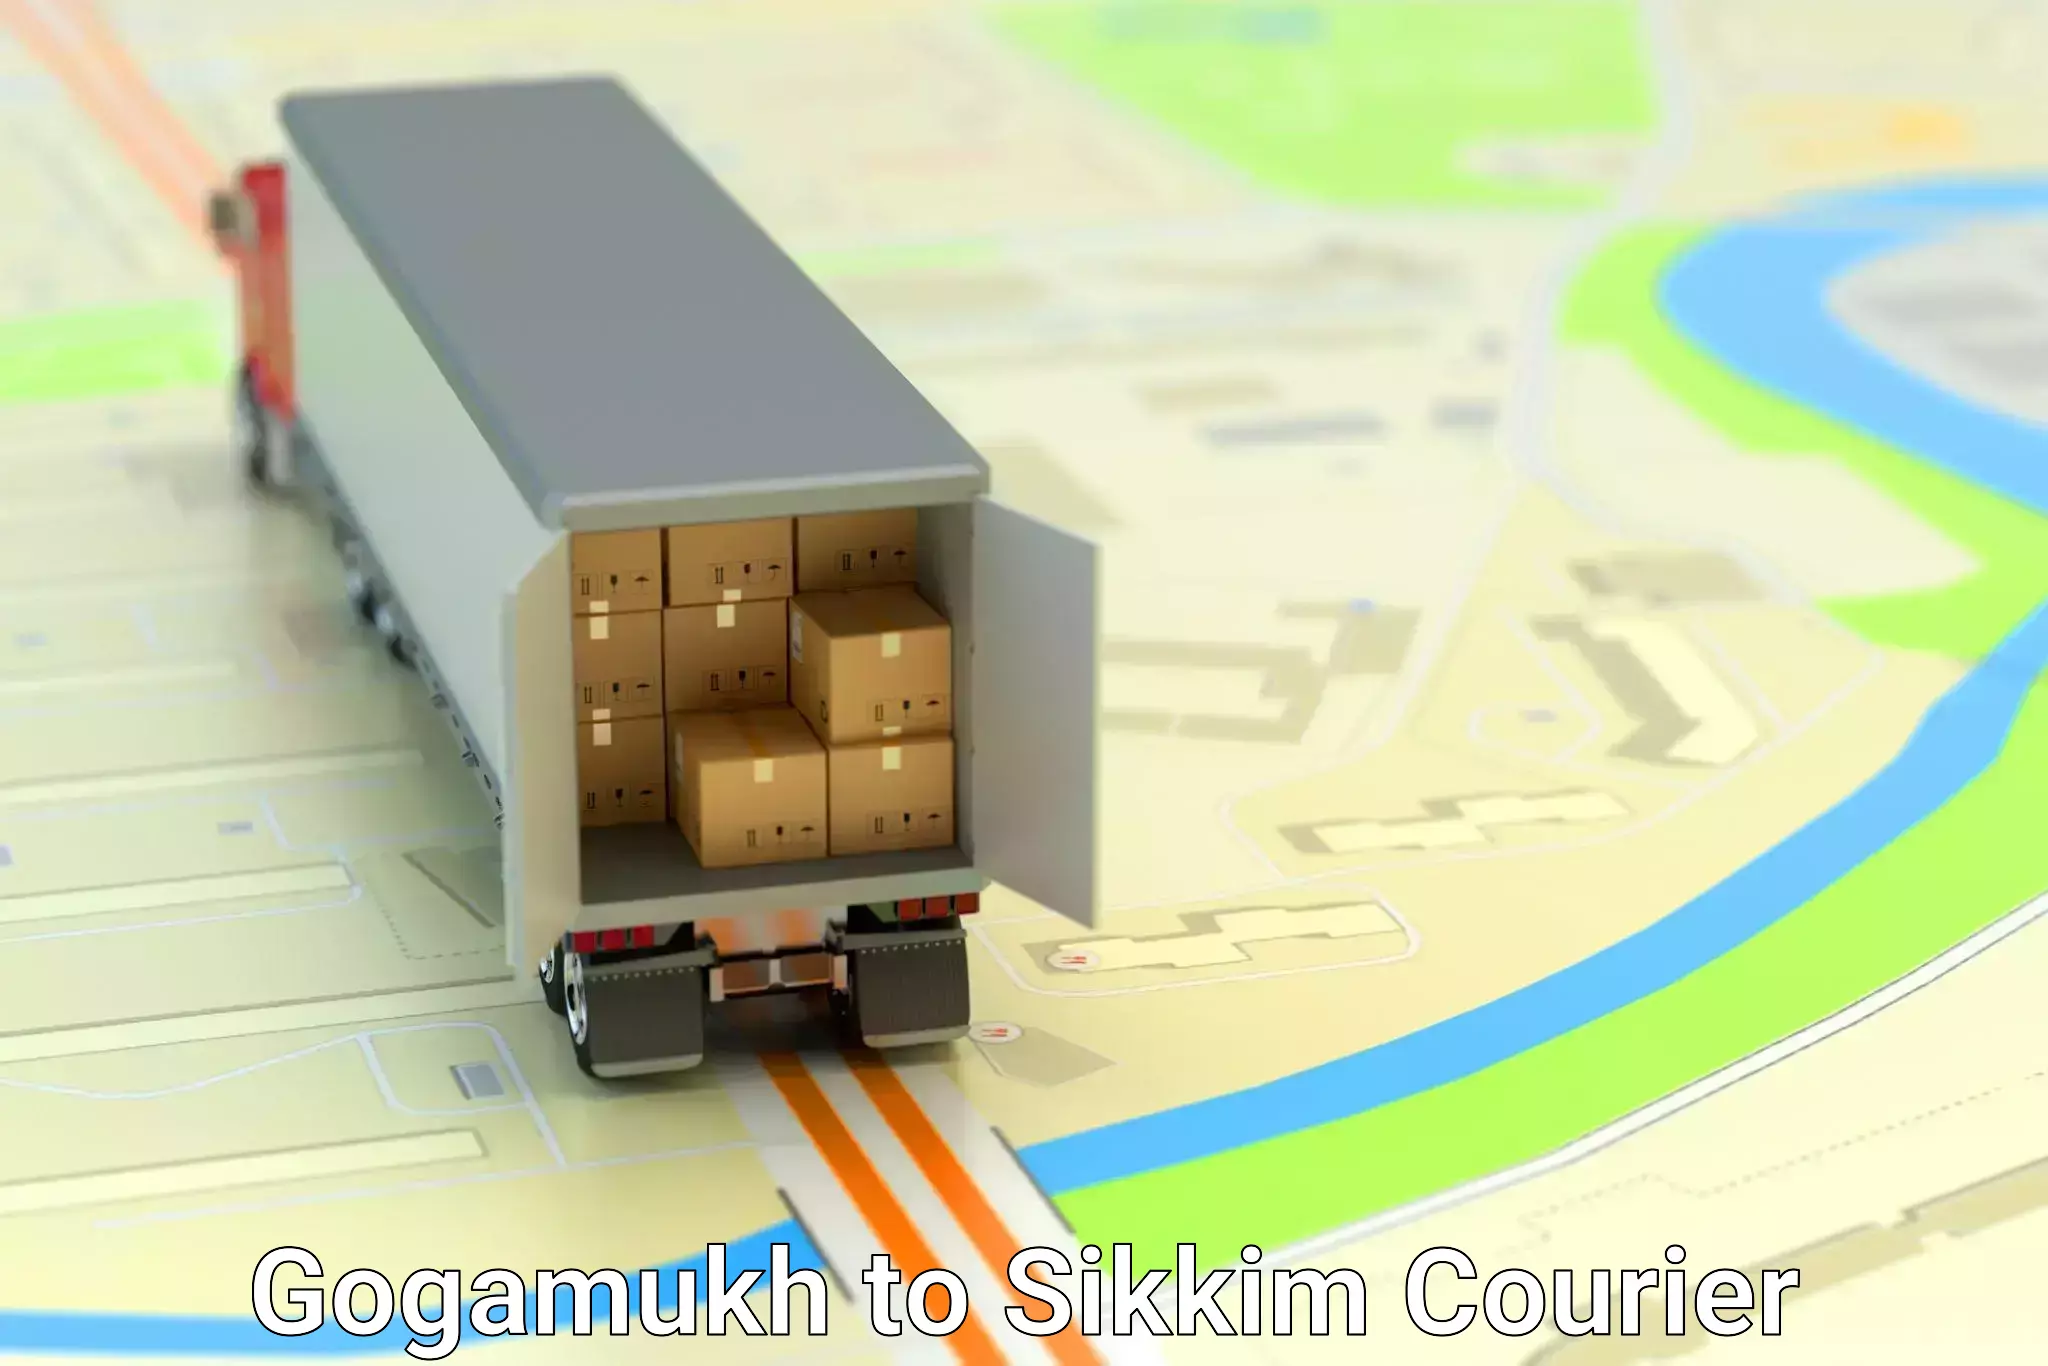 24/7 courier service Gogamukh to Sikkim